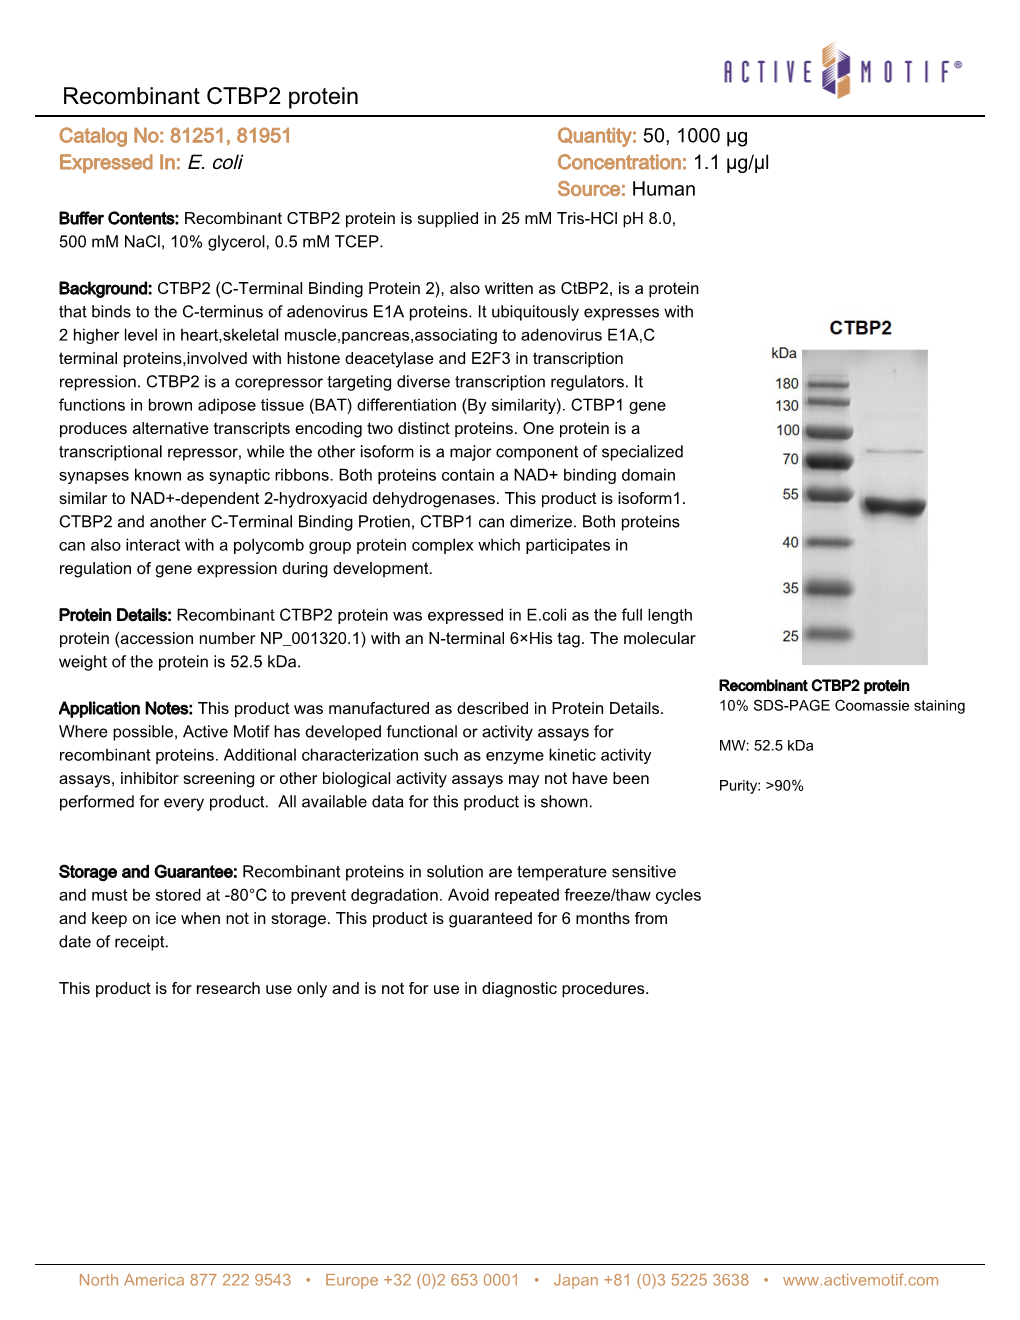 Recombinant CTBP2 Protein Catalog No: 81251, 81951 Quantity: 50, 1000 Μg Expressed In: E